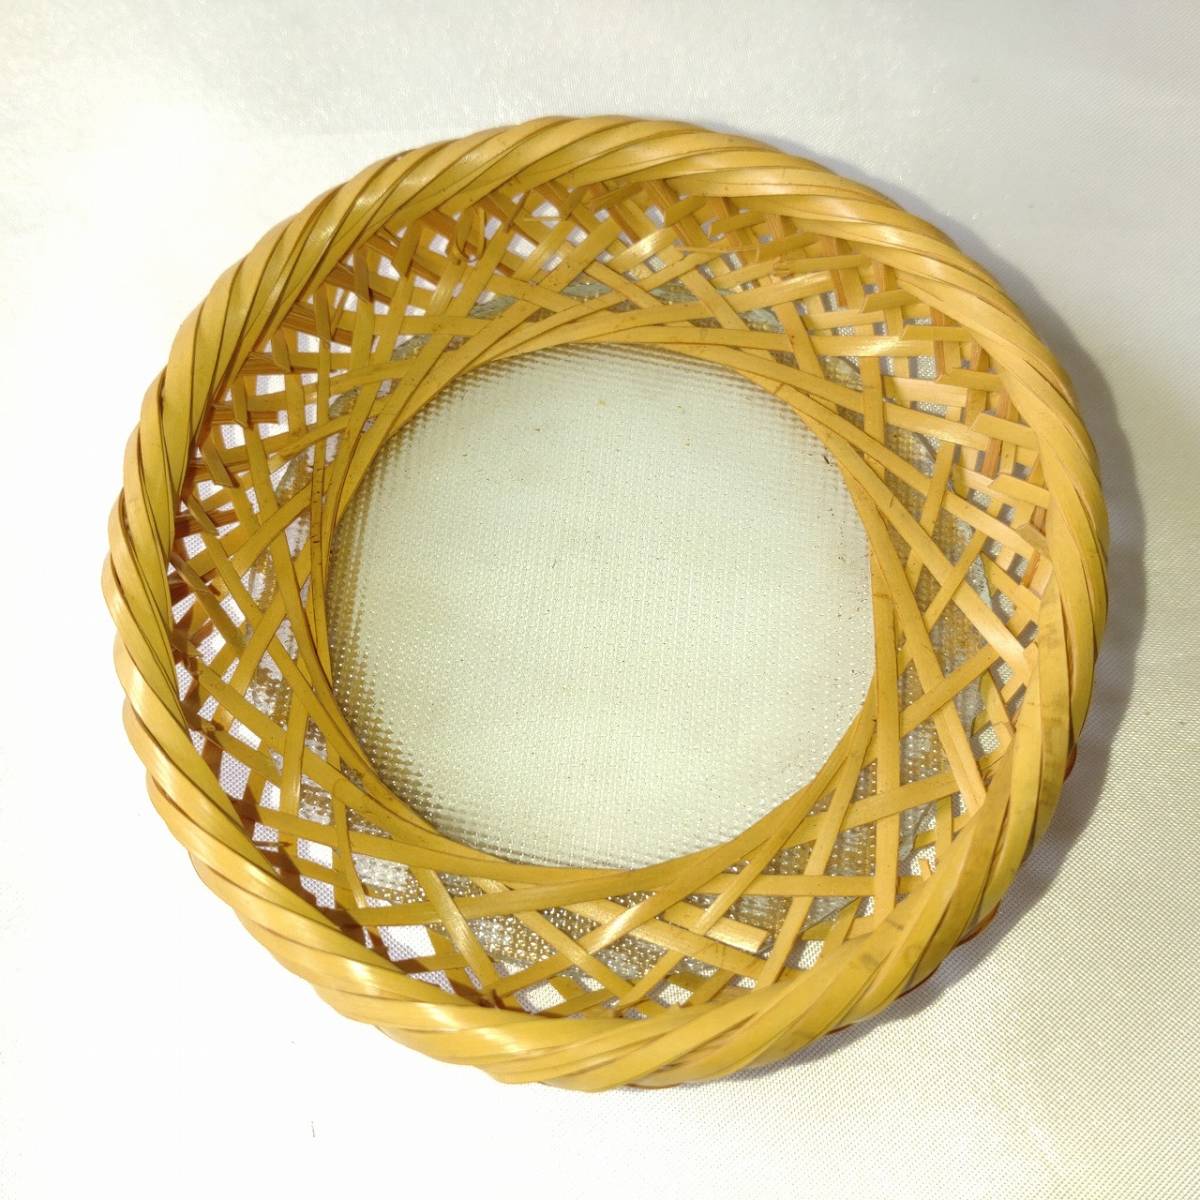  old glass bamboo braided Coaster 6 piece diameter approximately 8cm teacup sauce old glass Japanese-style tableware retro [4212]